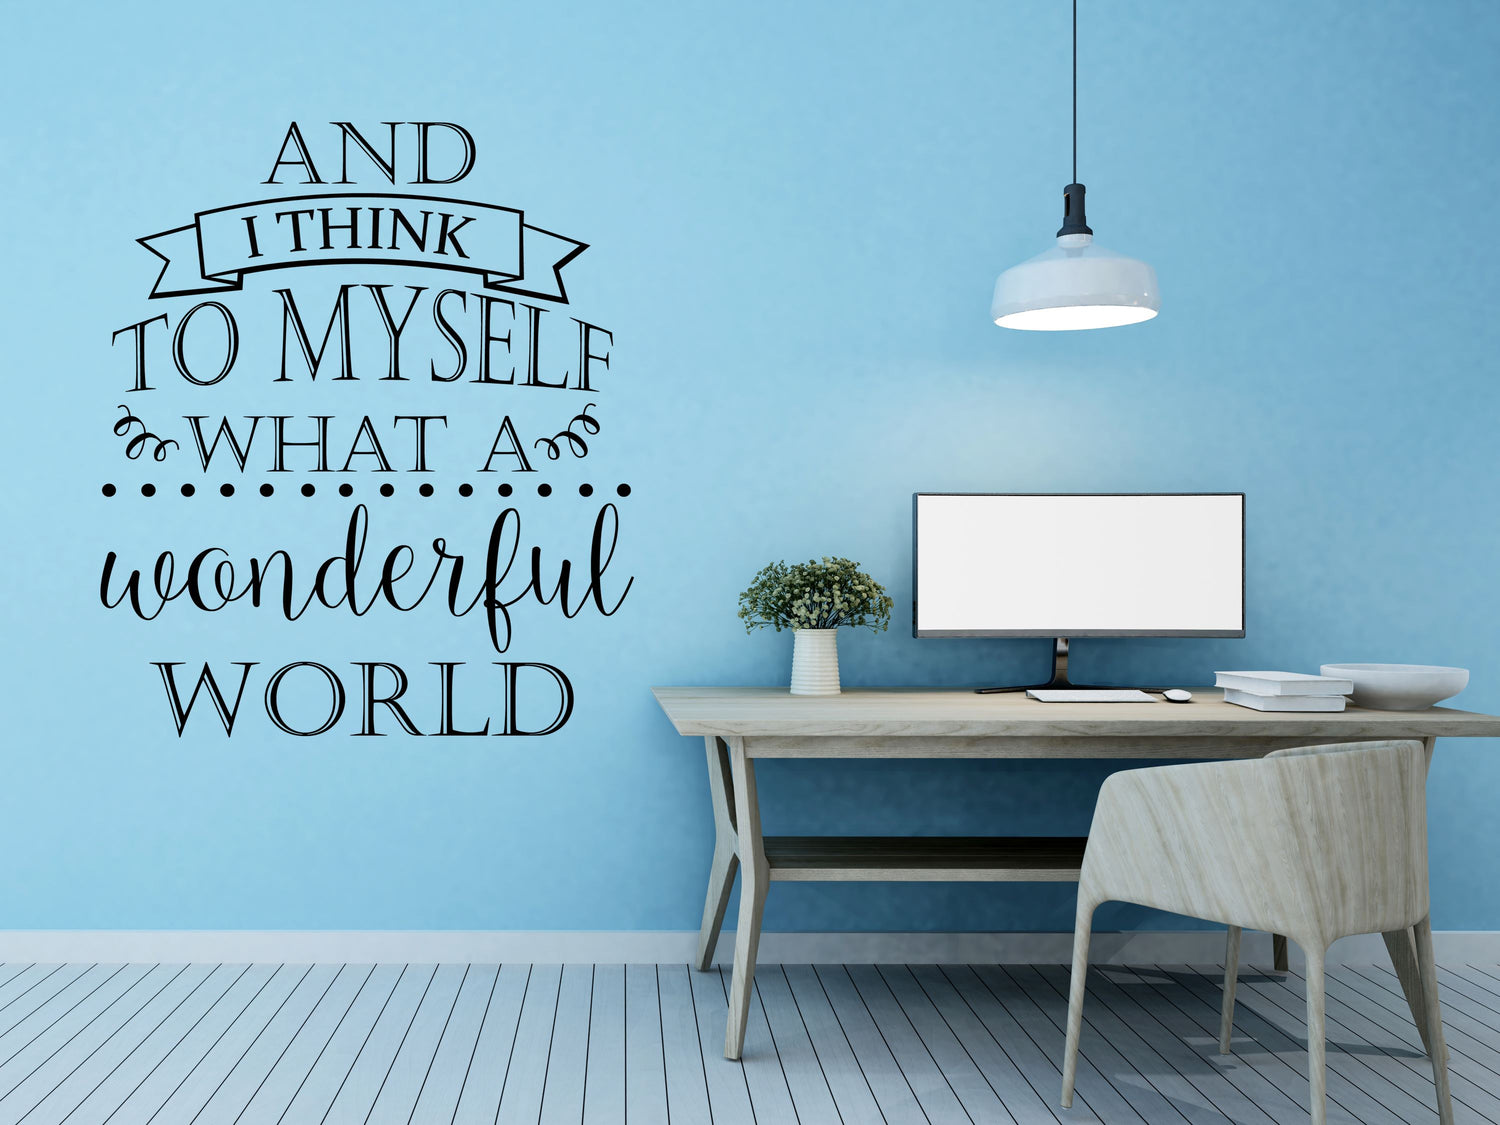 And I Think To Myself What a Wonderful World Wall Quote - Inspirational Wall Decal - Motivational Wall Decal Vinyl Wall Decal Done 